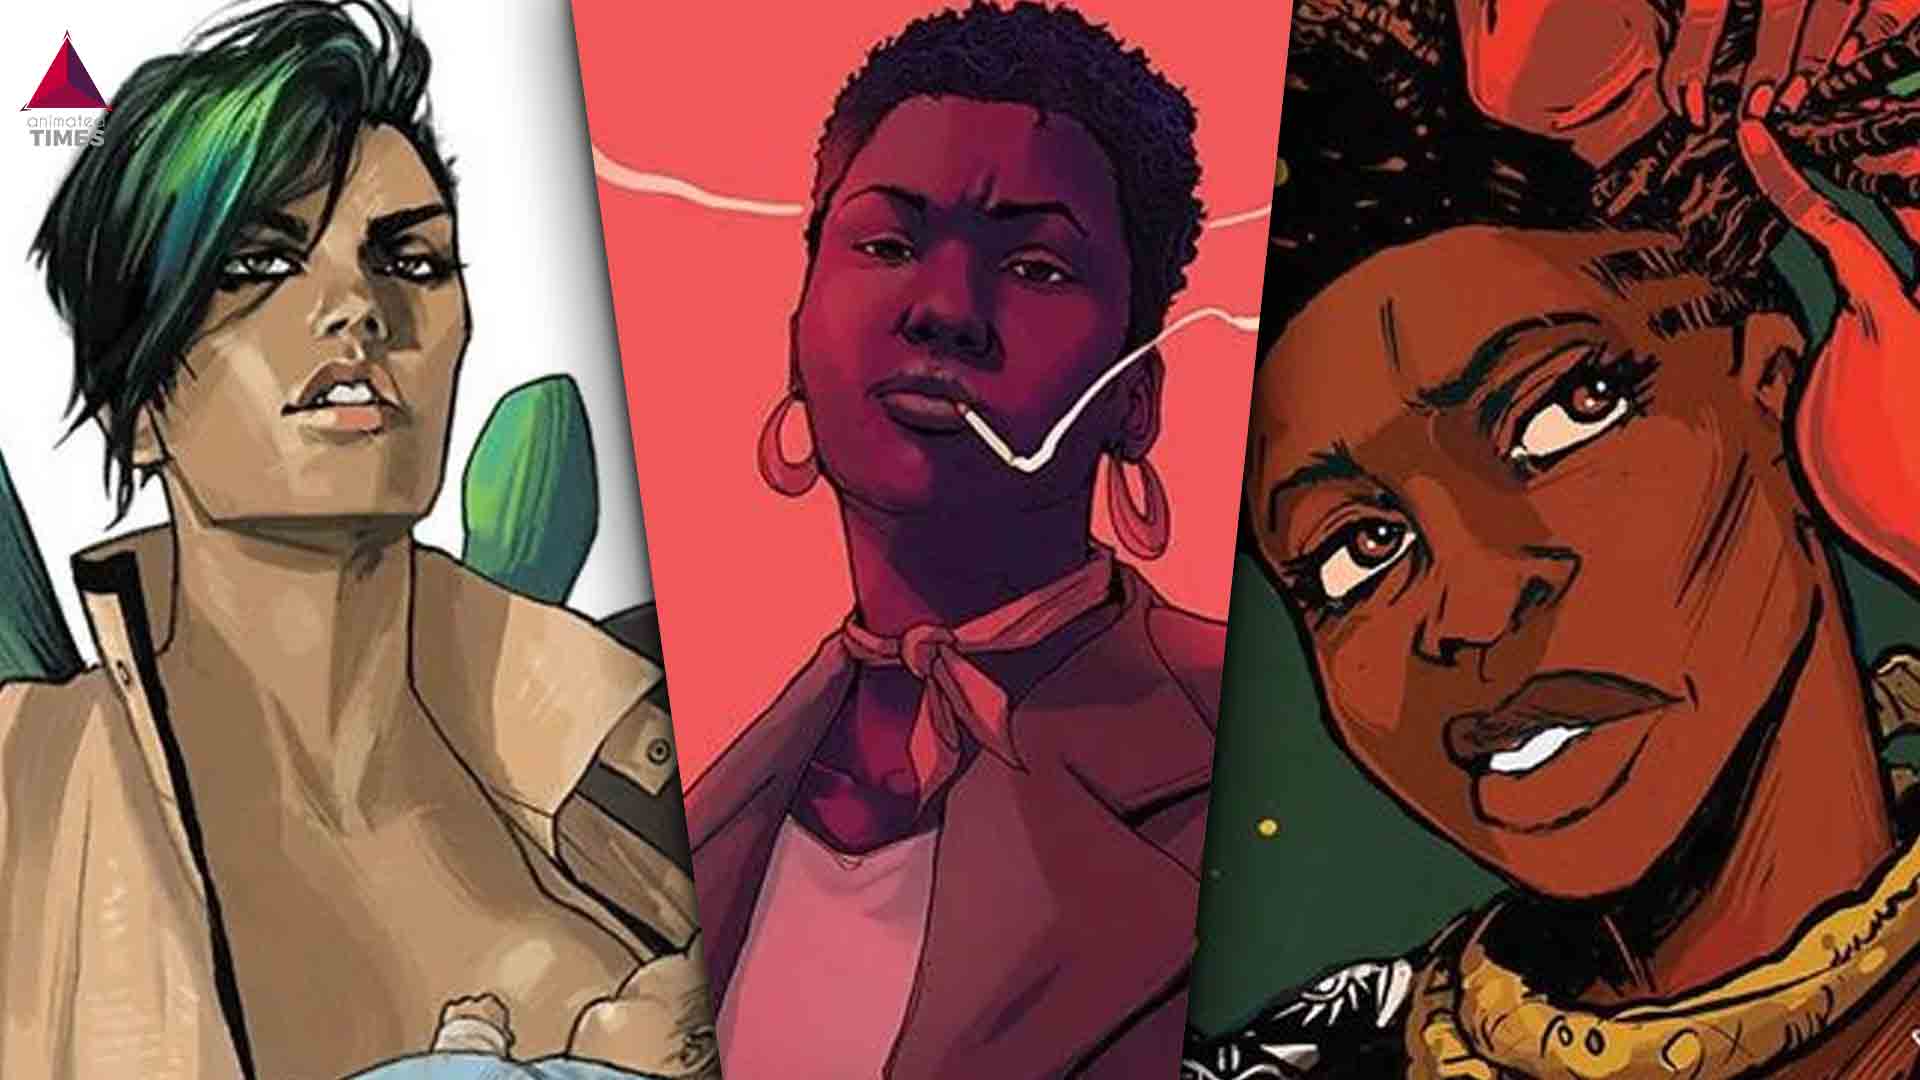 10 Best Non Superhero Graphic Novels That Would Make Amazing TV Shows